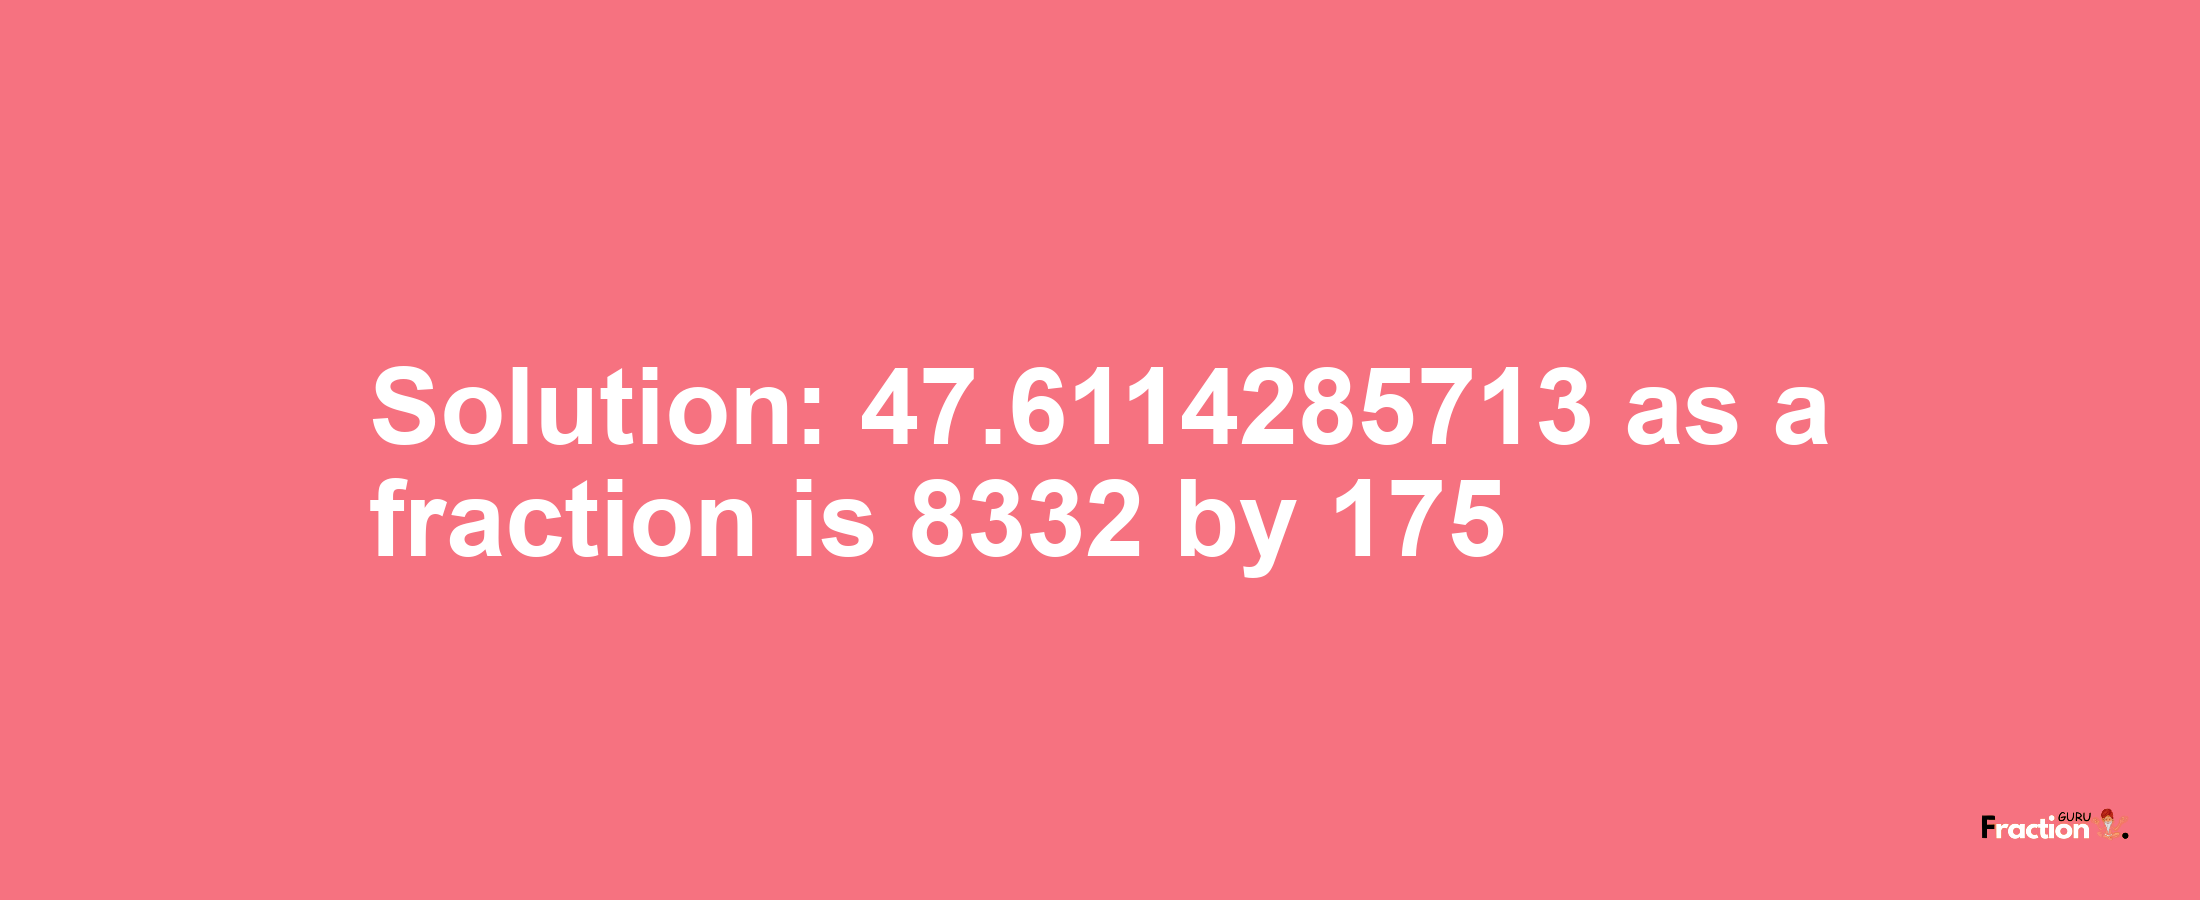 Solution:47.6114285713 as a fraction is 8332/175